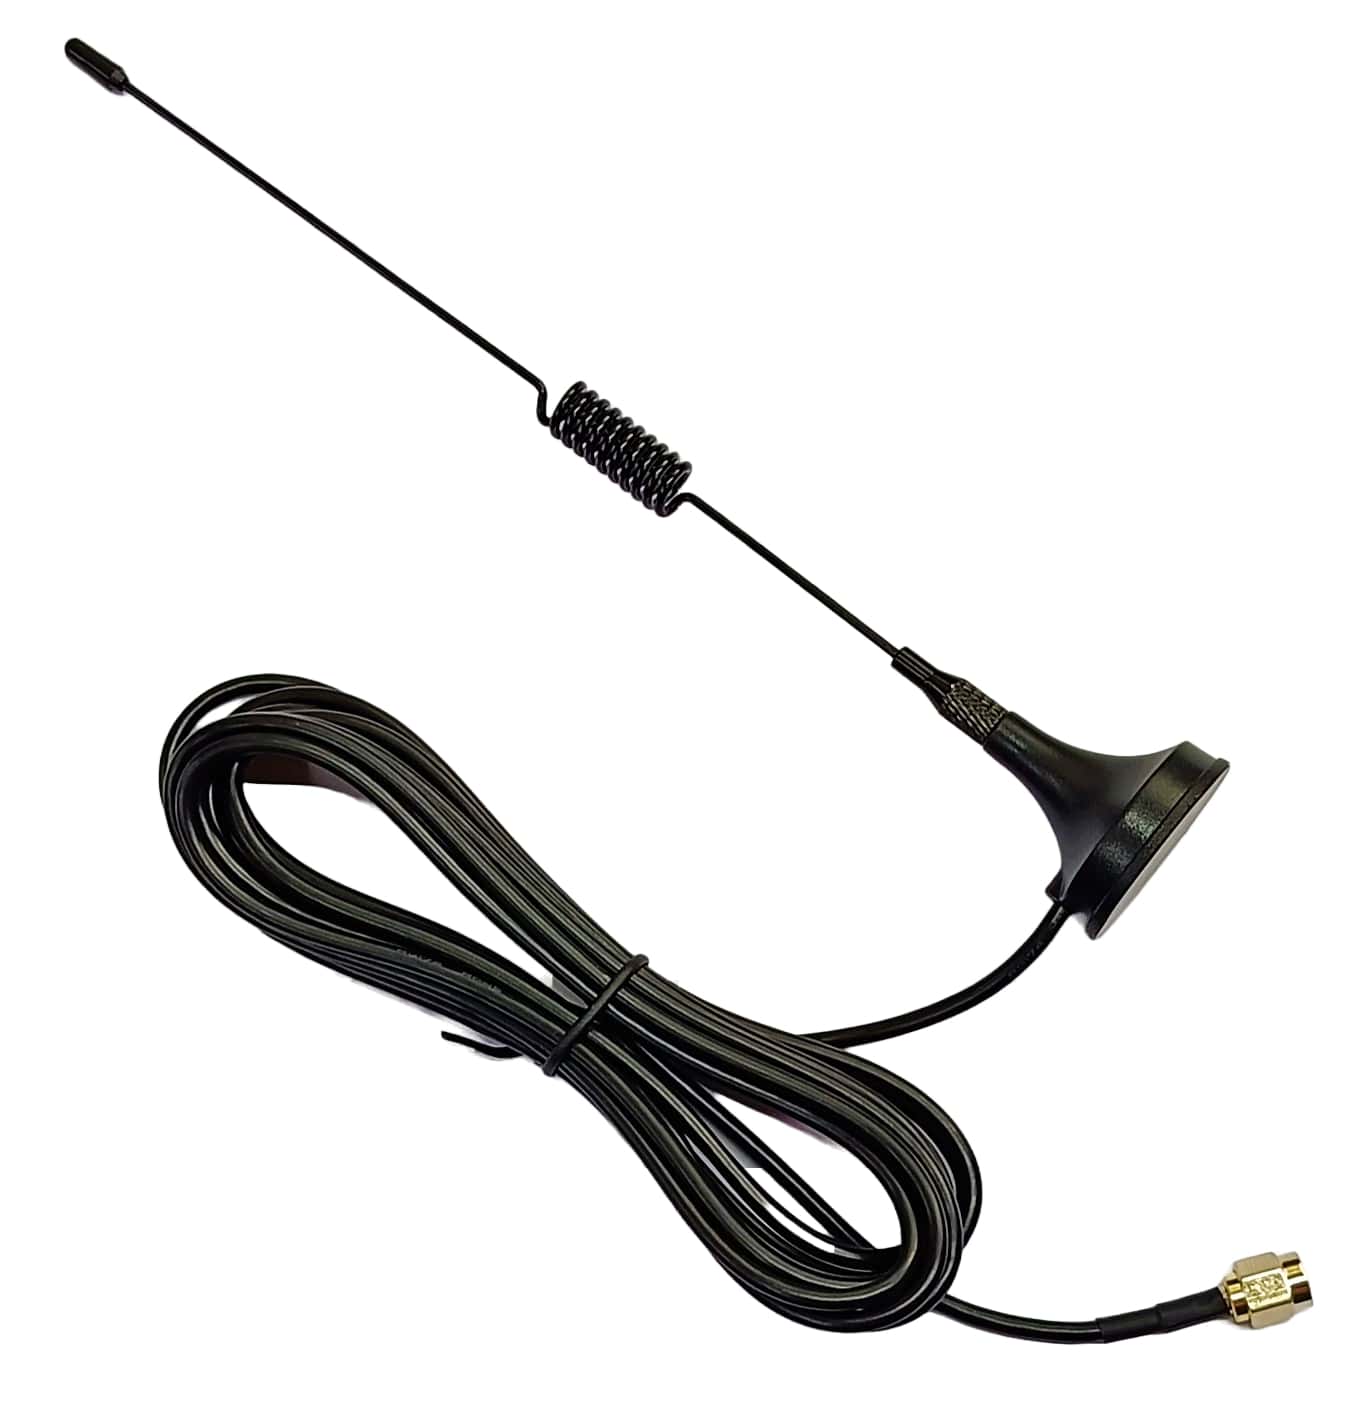 Gsm wire Antenna 5db with 10 cms Male mount